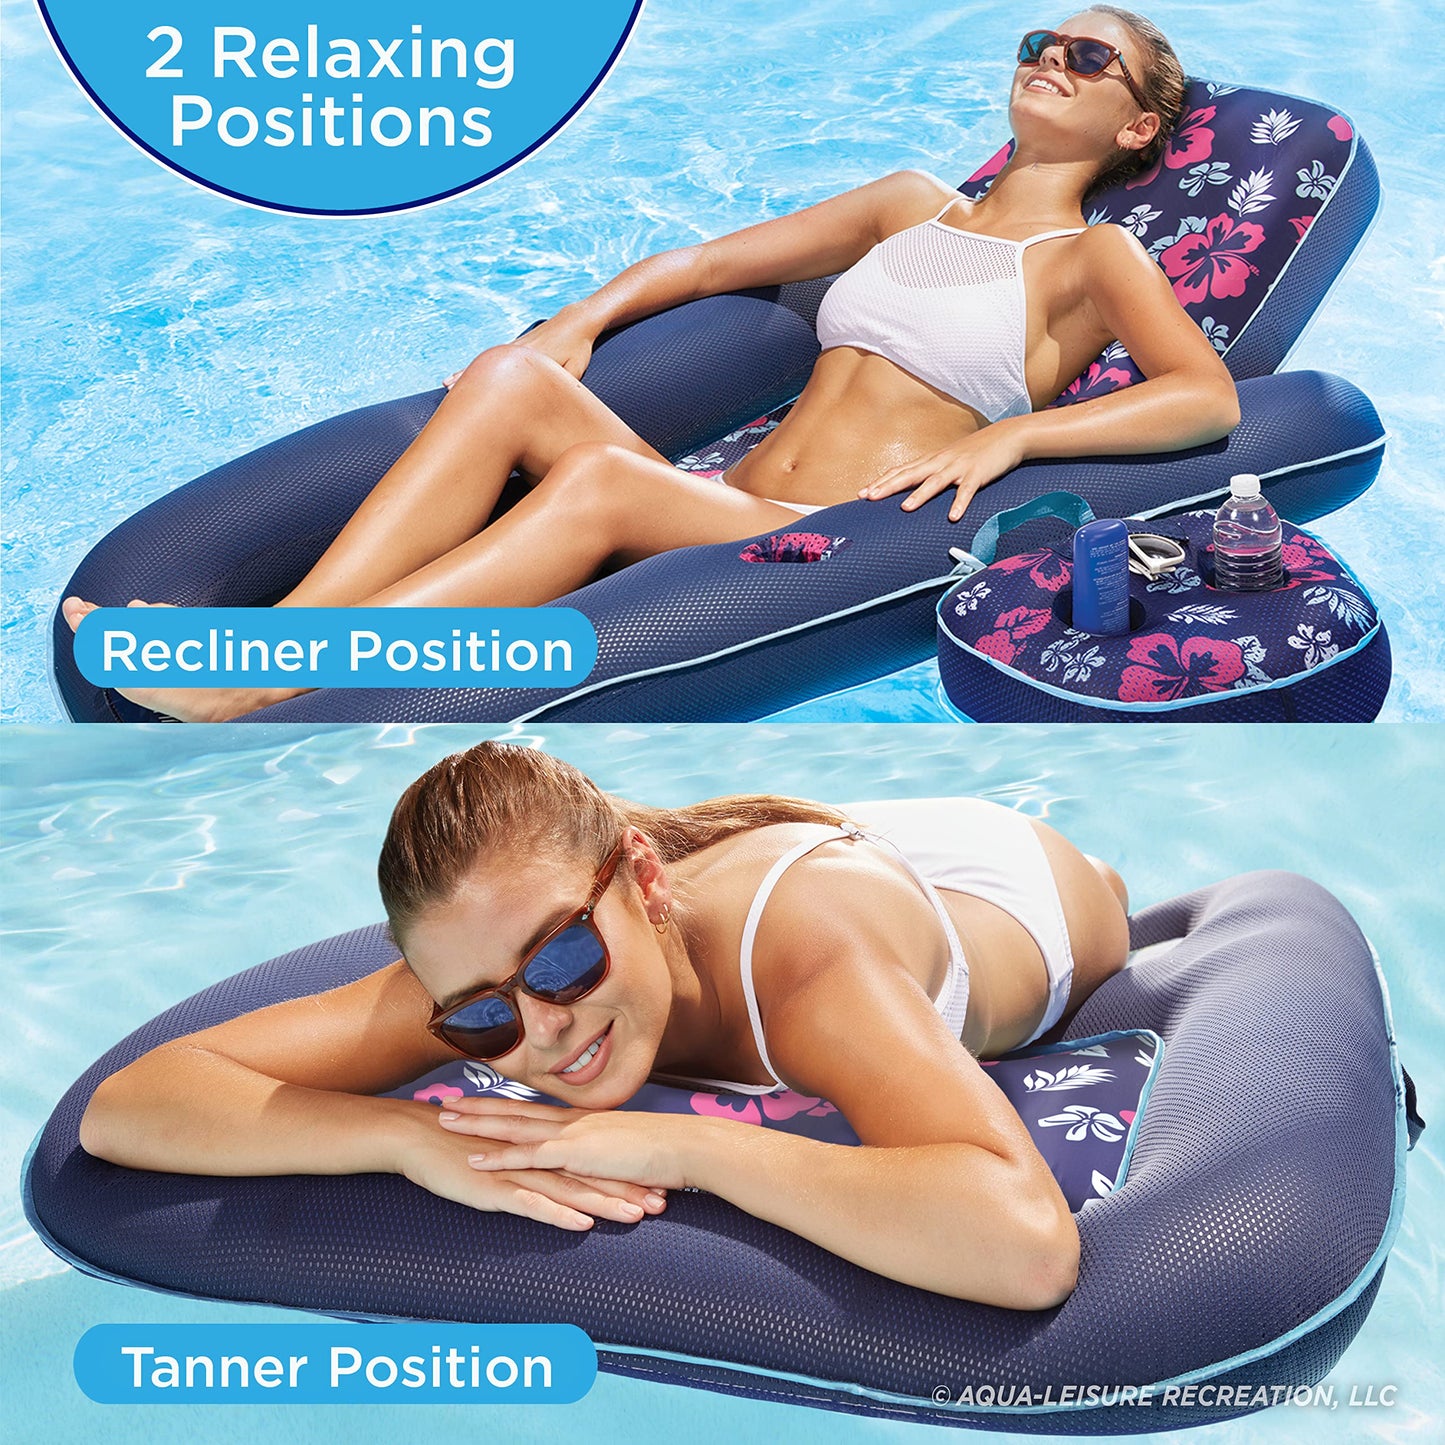 Aqua Oversized Ultimate Pool Lounger, Inflatable Pool Float with UPF 50 Sunshade Canopy, Heavy Duty, X-Large, Navy/Aqua/White Stripe Aqua Navy Campania 2-in-1 Recliner